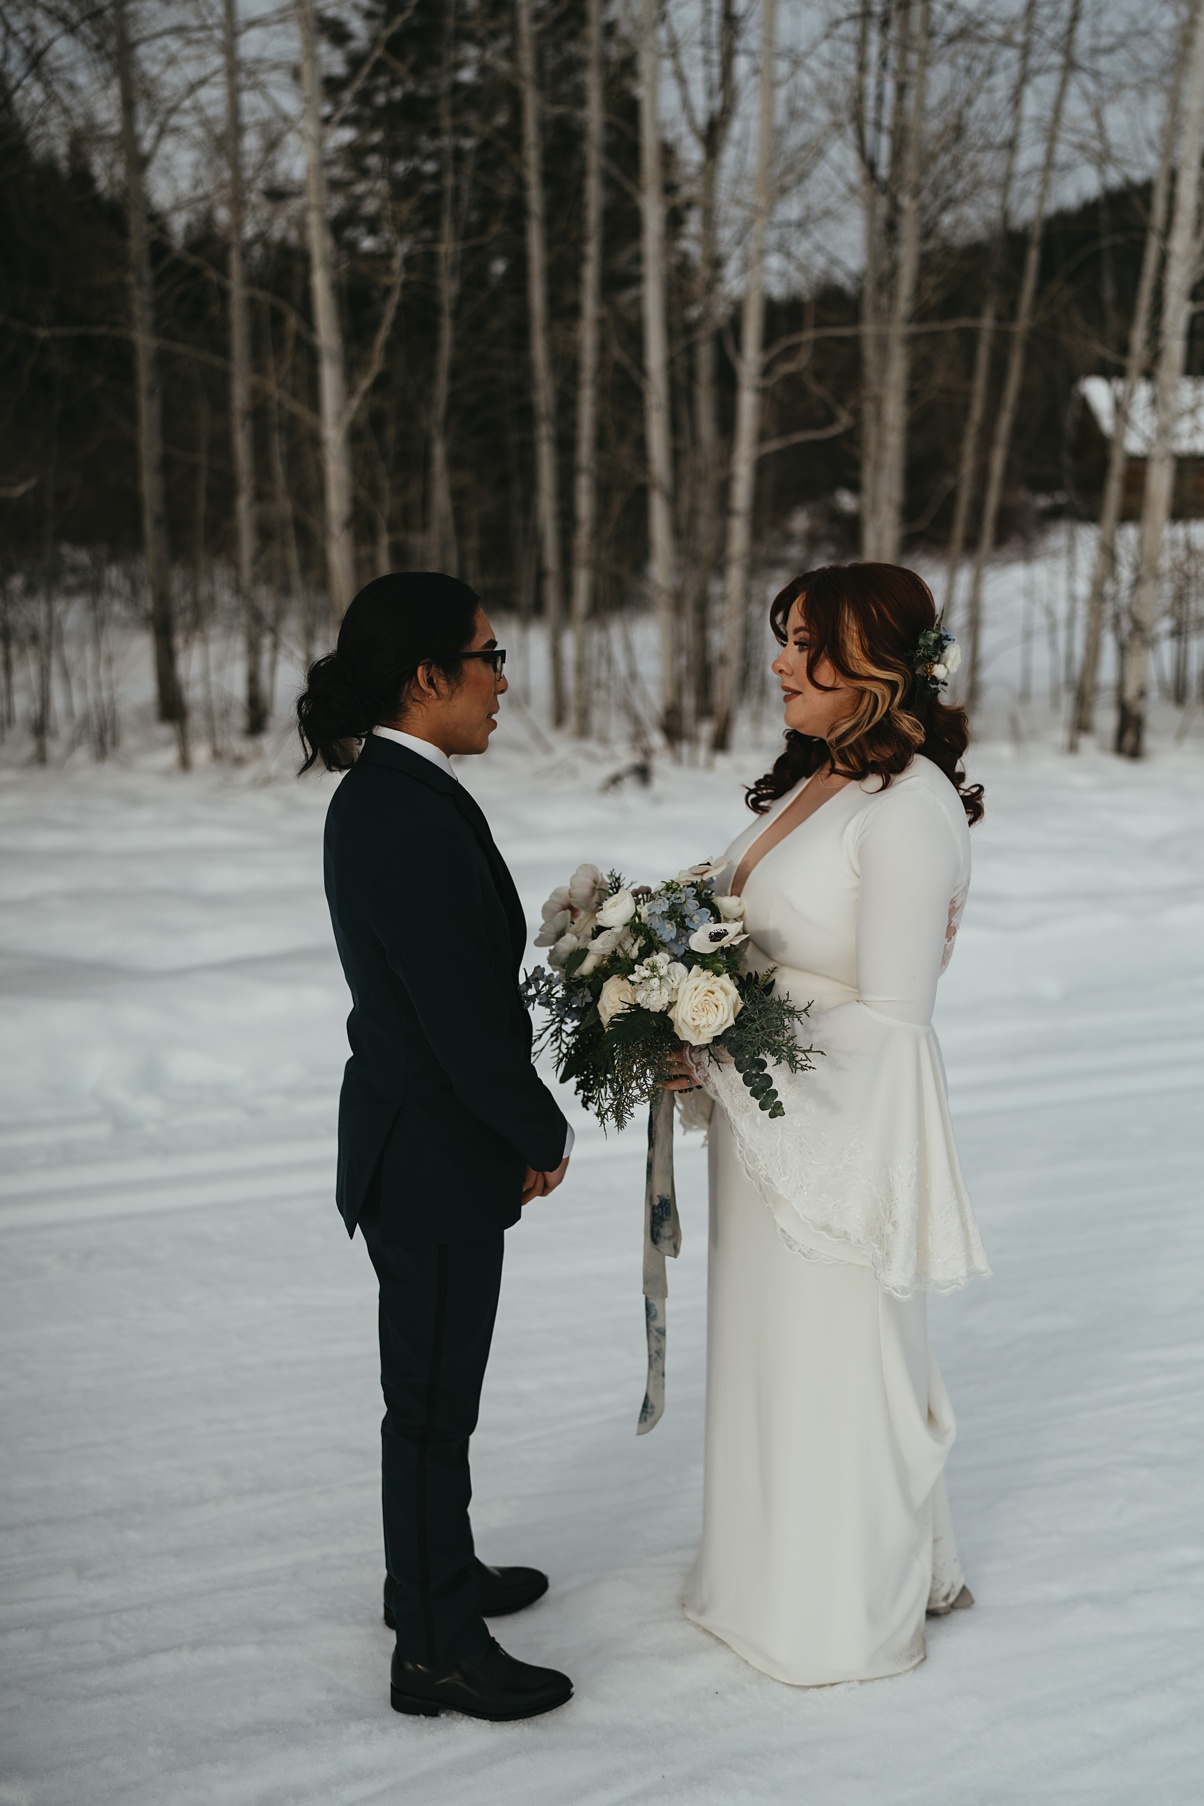 The couple having a snowy first look